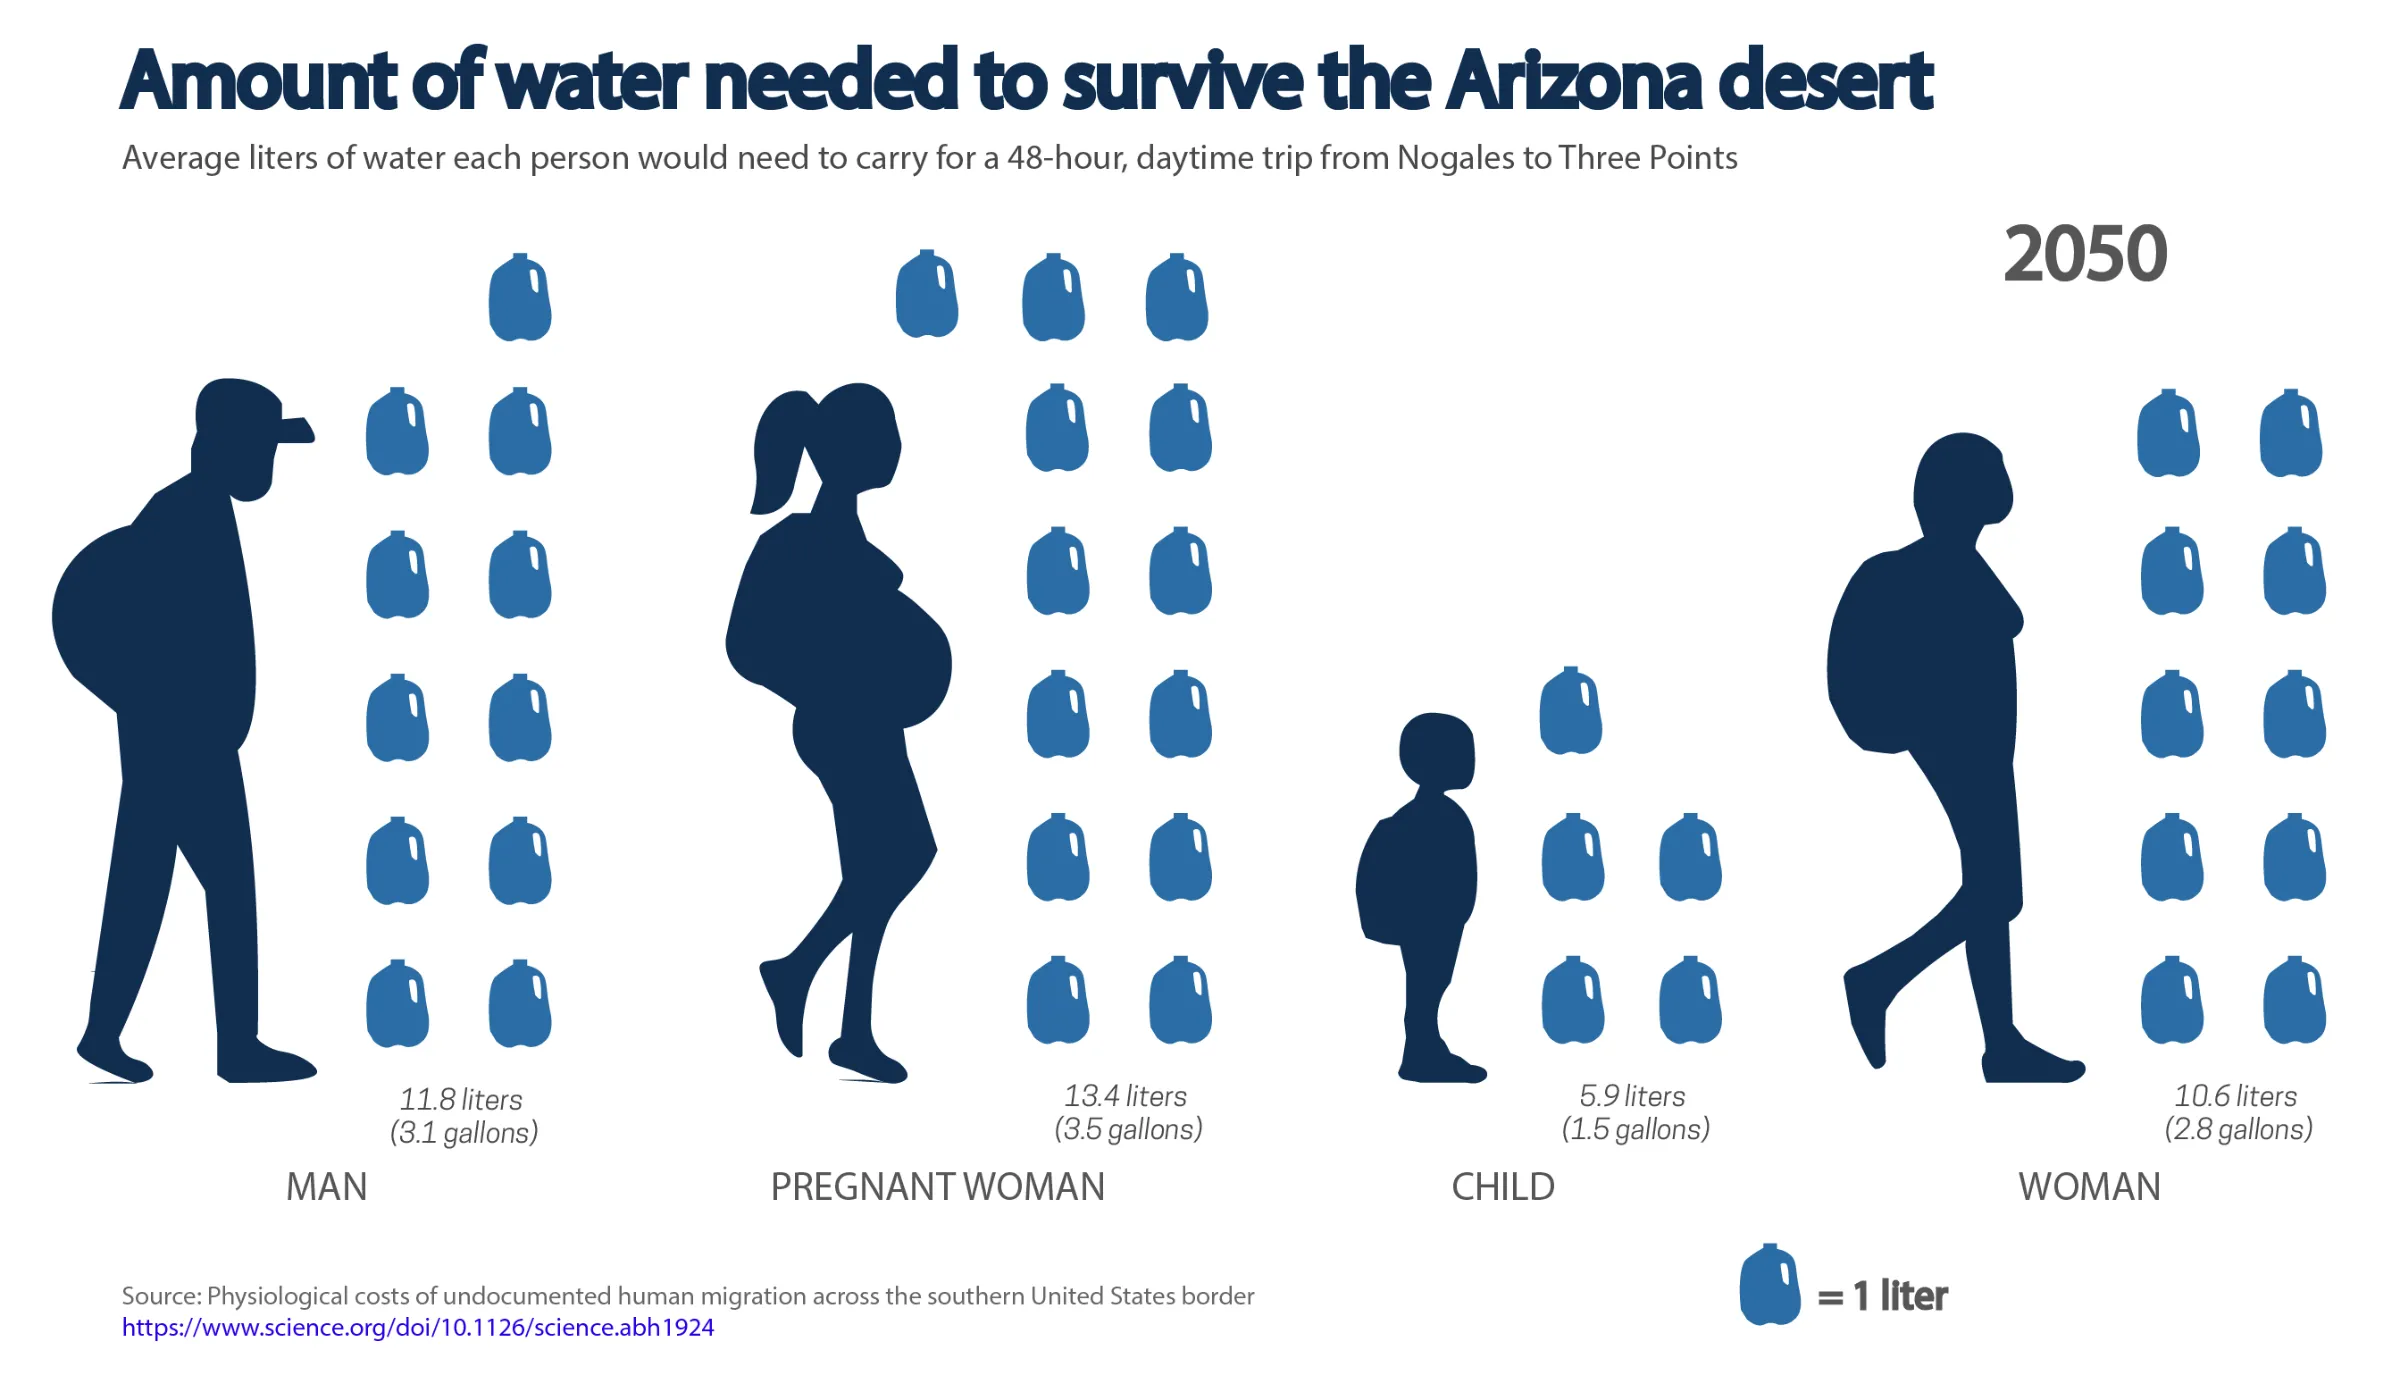 Amount of water needed to survive in Amazonia desert. Average liters of water each person would need to carry for a 48=hour daytime trip from Nogales to Three Points between 2020 and 2050. November 2, 2022. Thomson Reuters Foundation/Diana Baptista